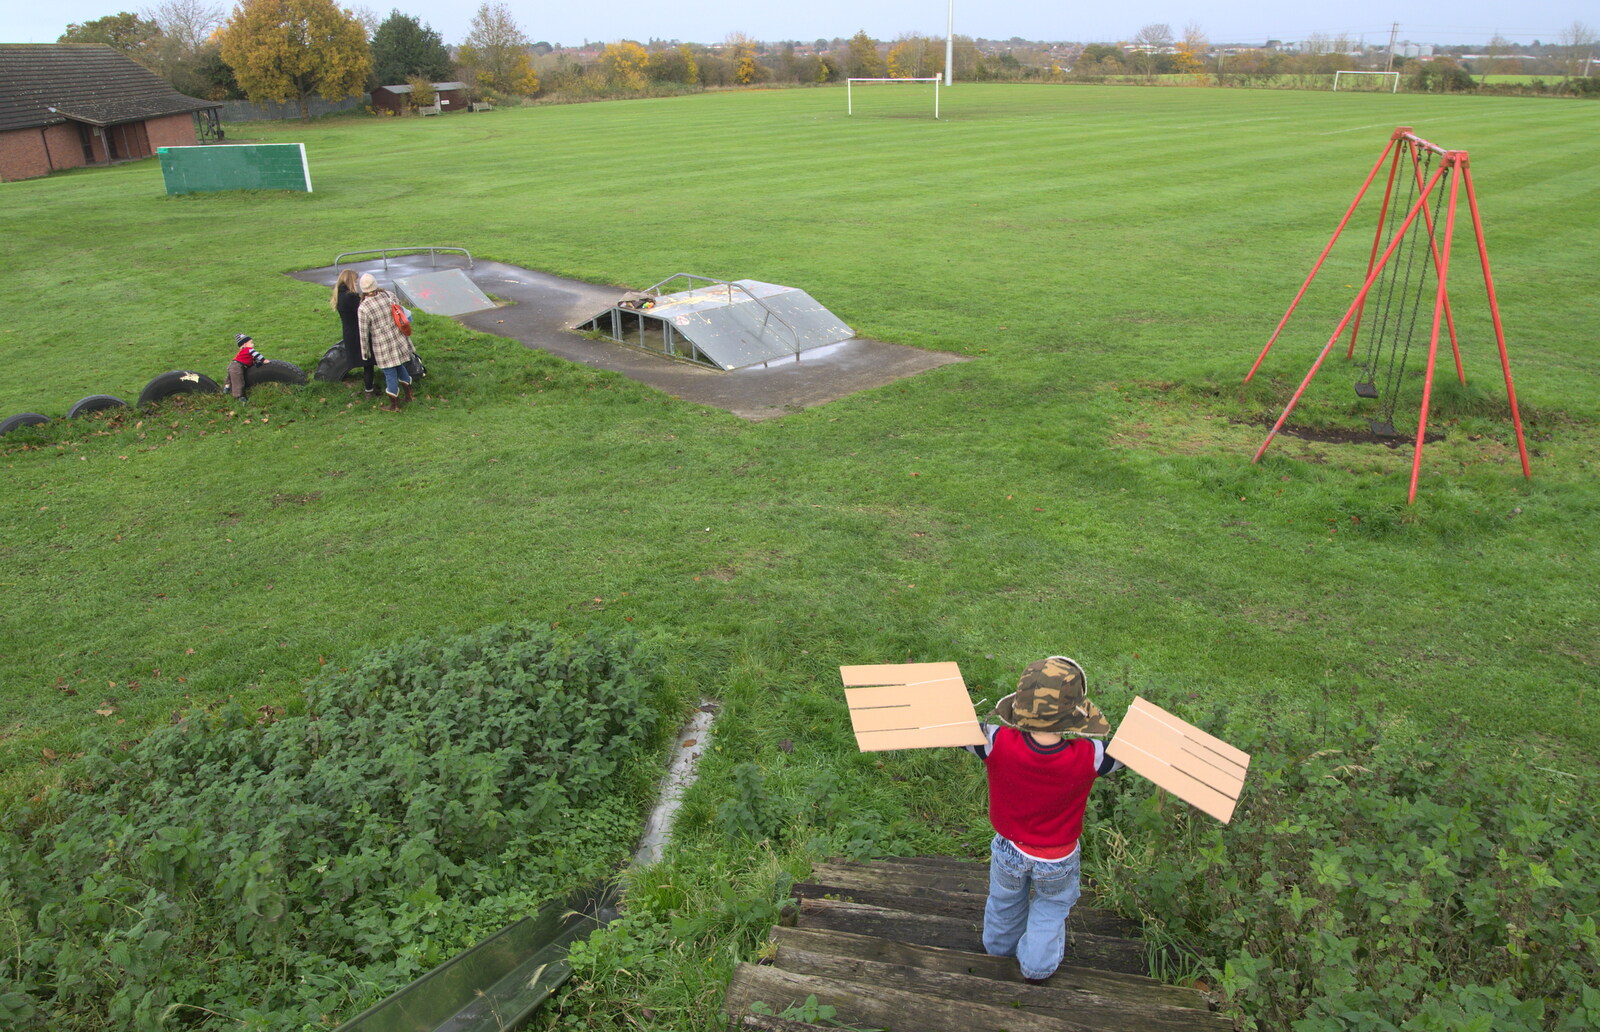 More Building and Palgrave Playground, Suffolk - 24th November 2013: Fred goes flying